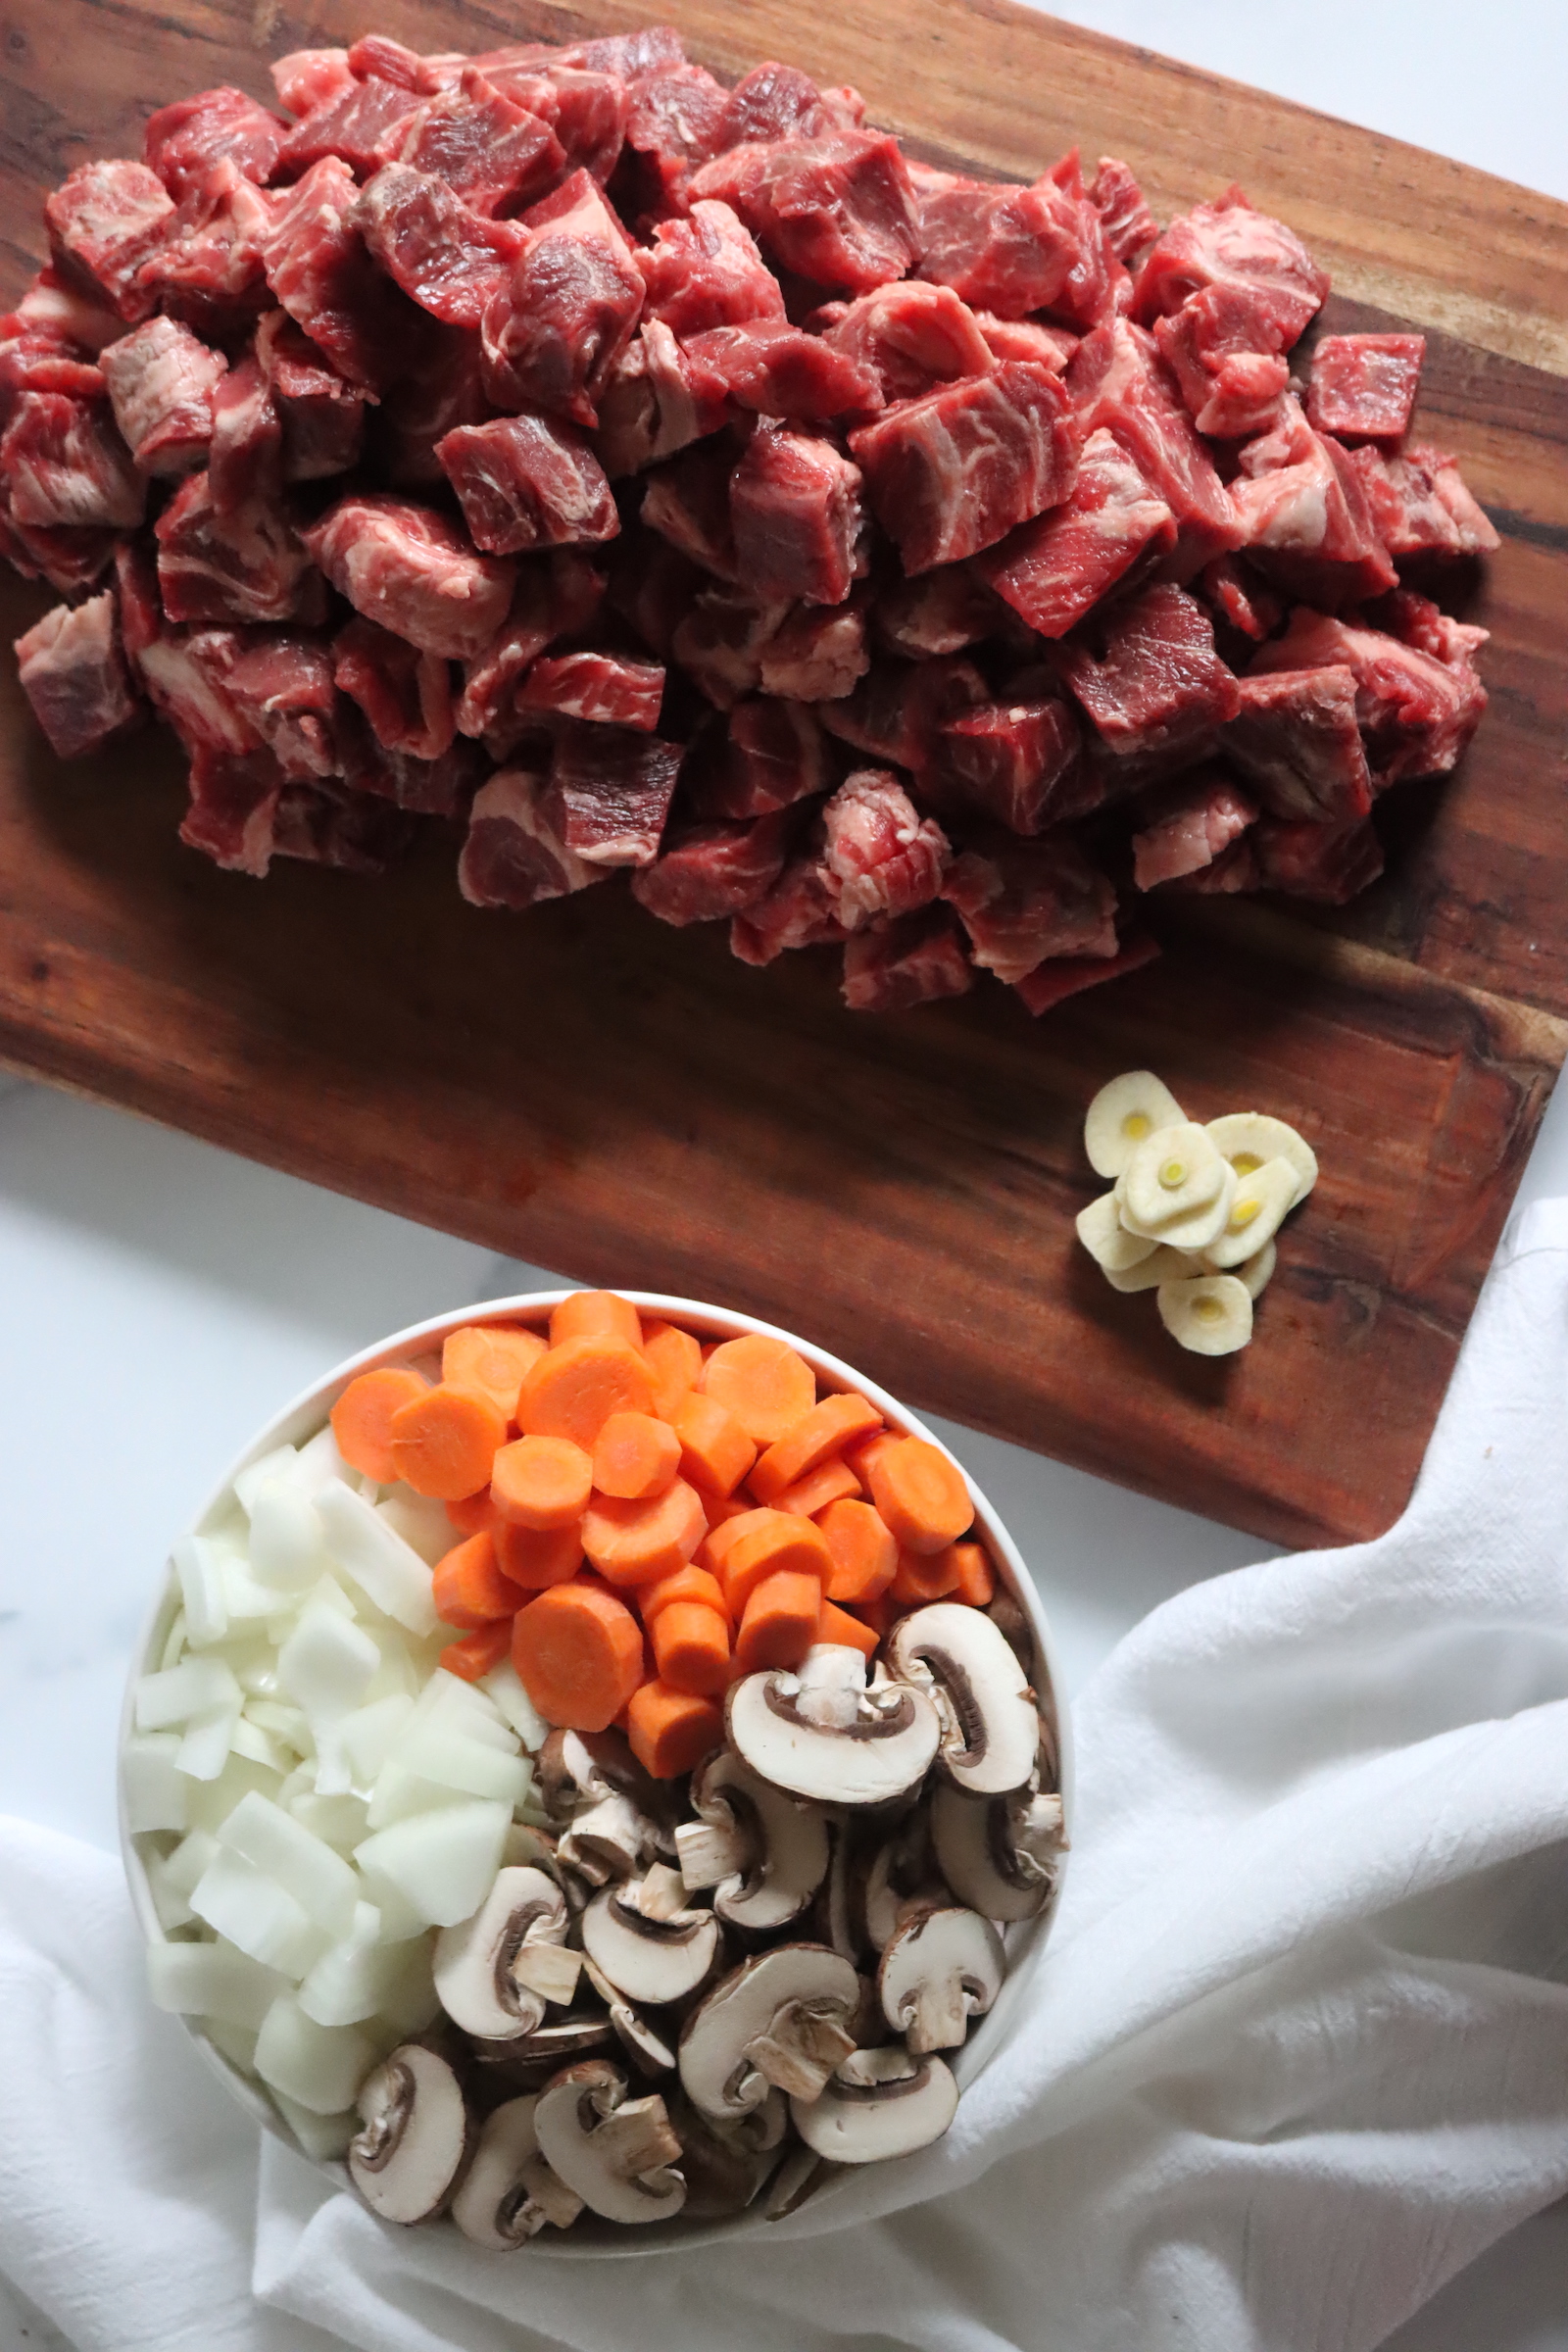 Ingredients for Canning Beef Burgundy